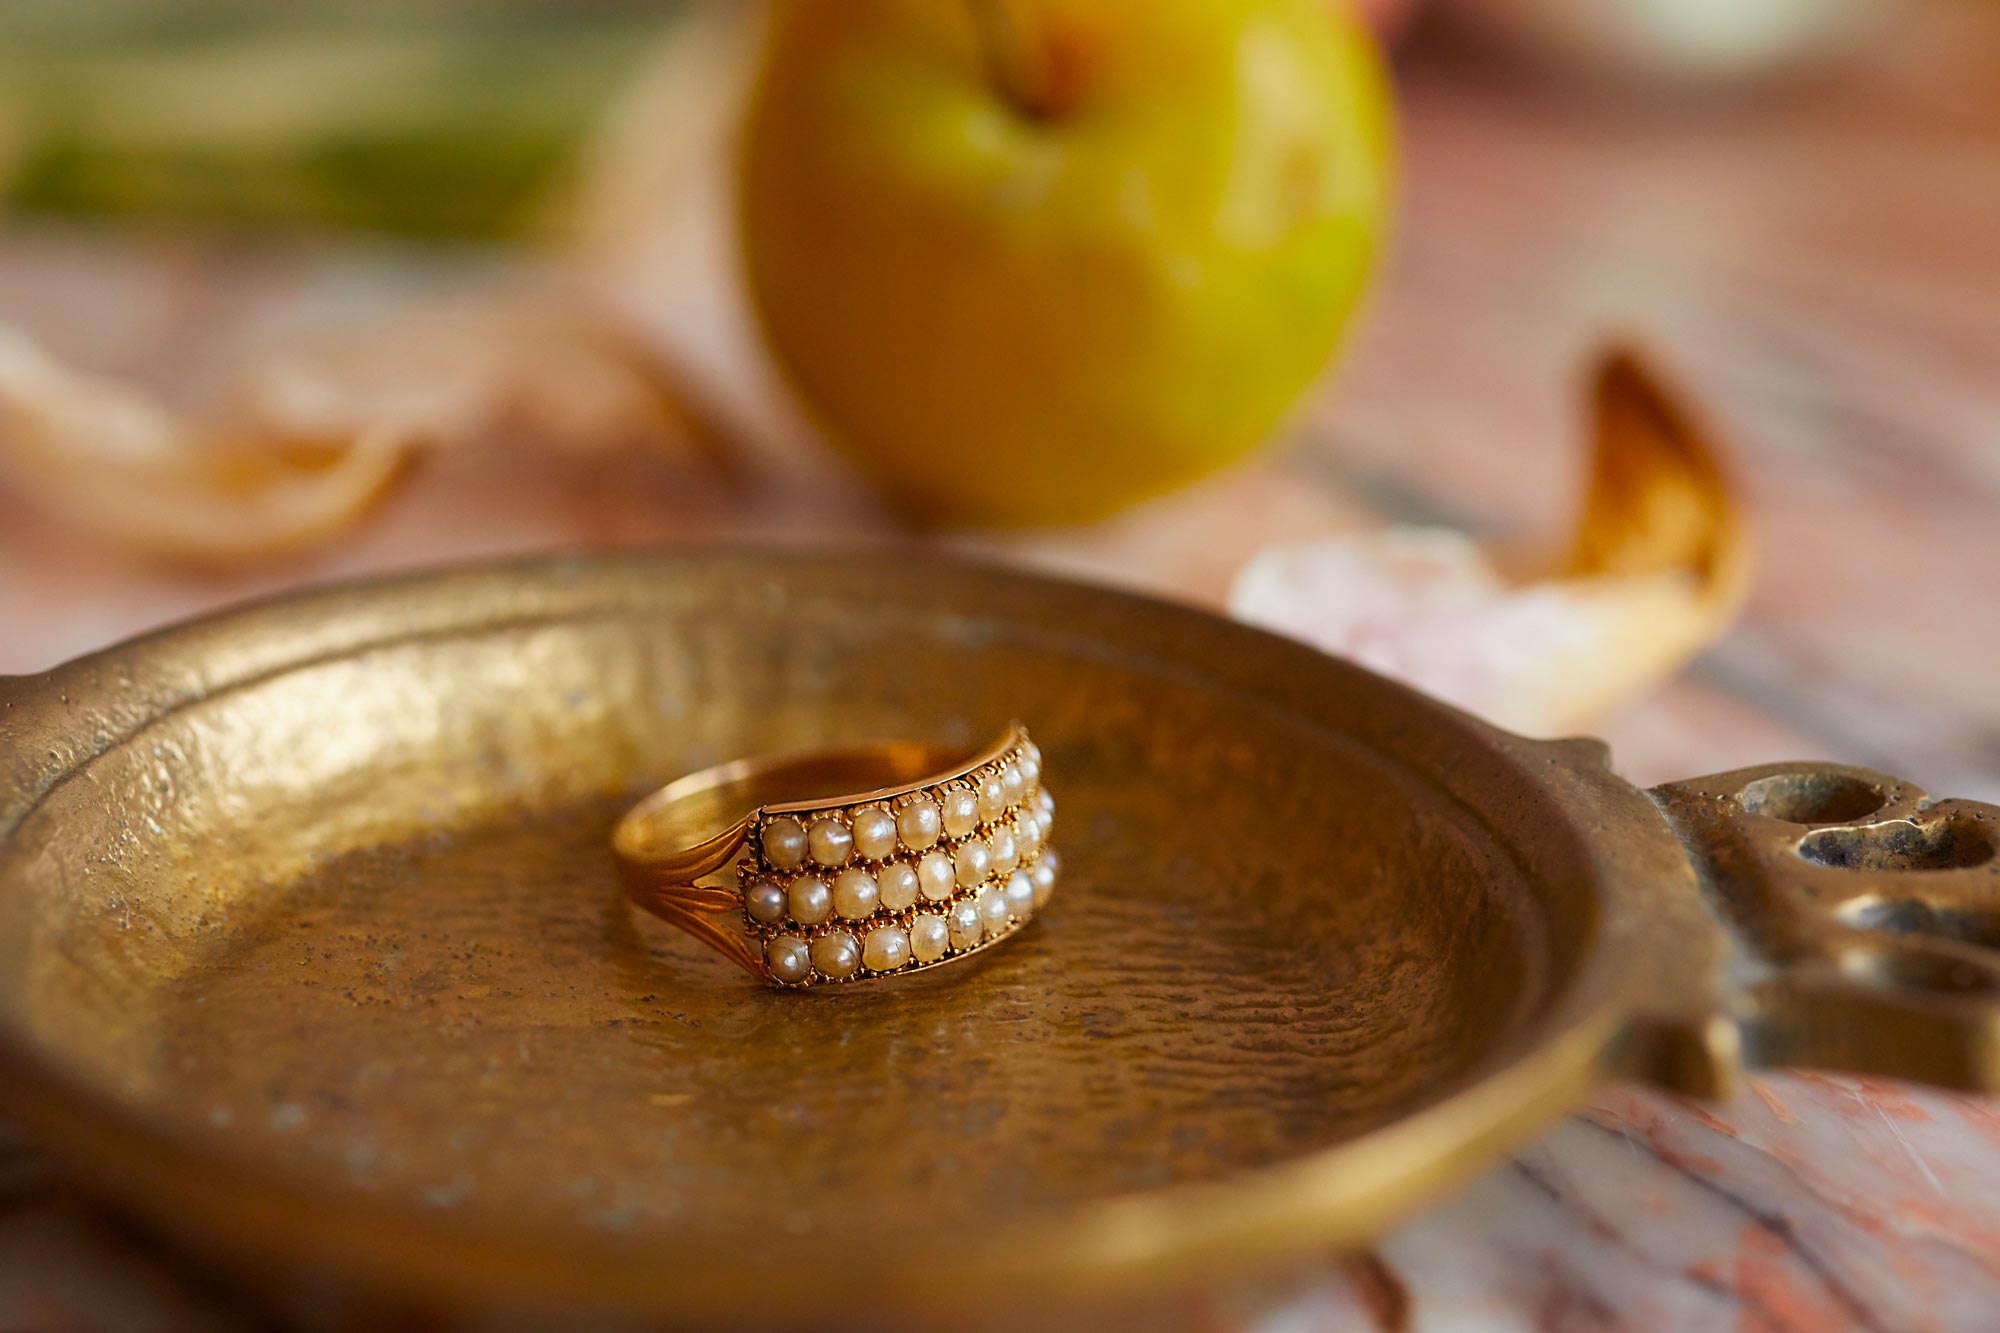 antique pearl ring on a tray